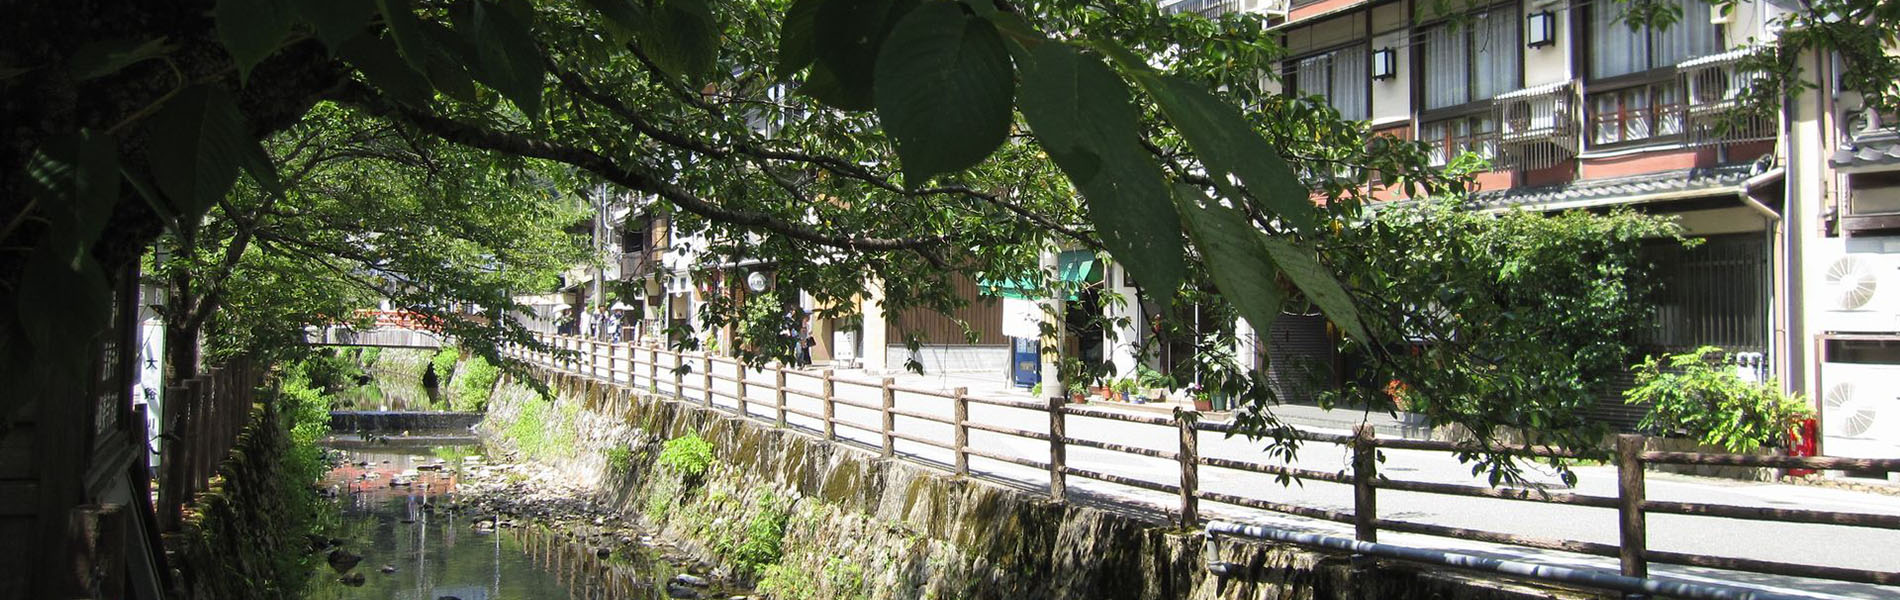 Conveniently located for sightseeing and visiting Kinosaki’s hot springs